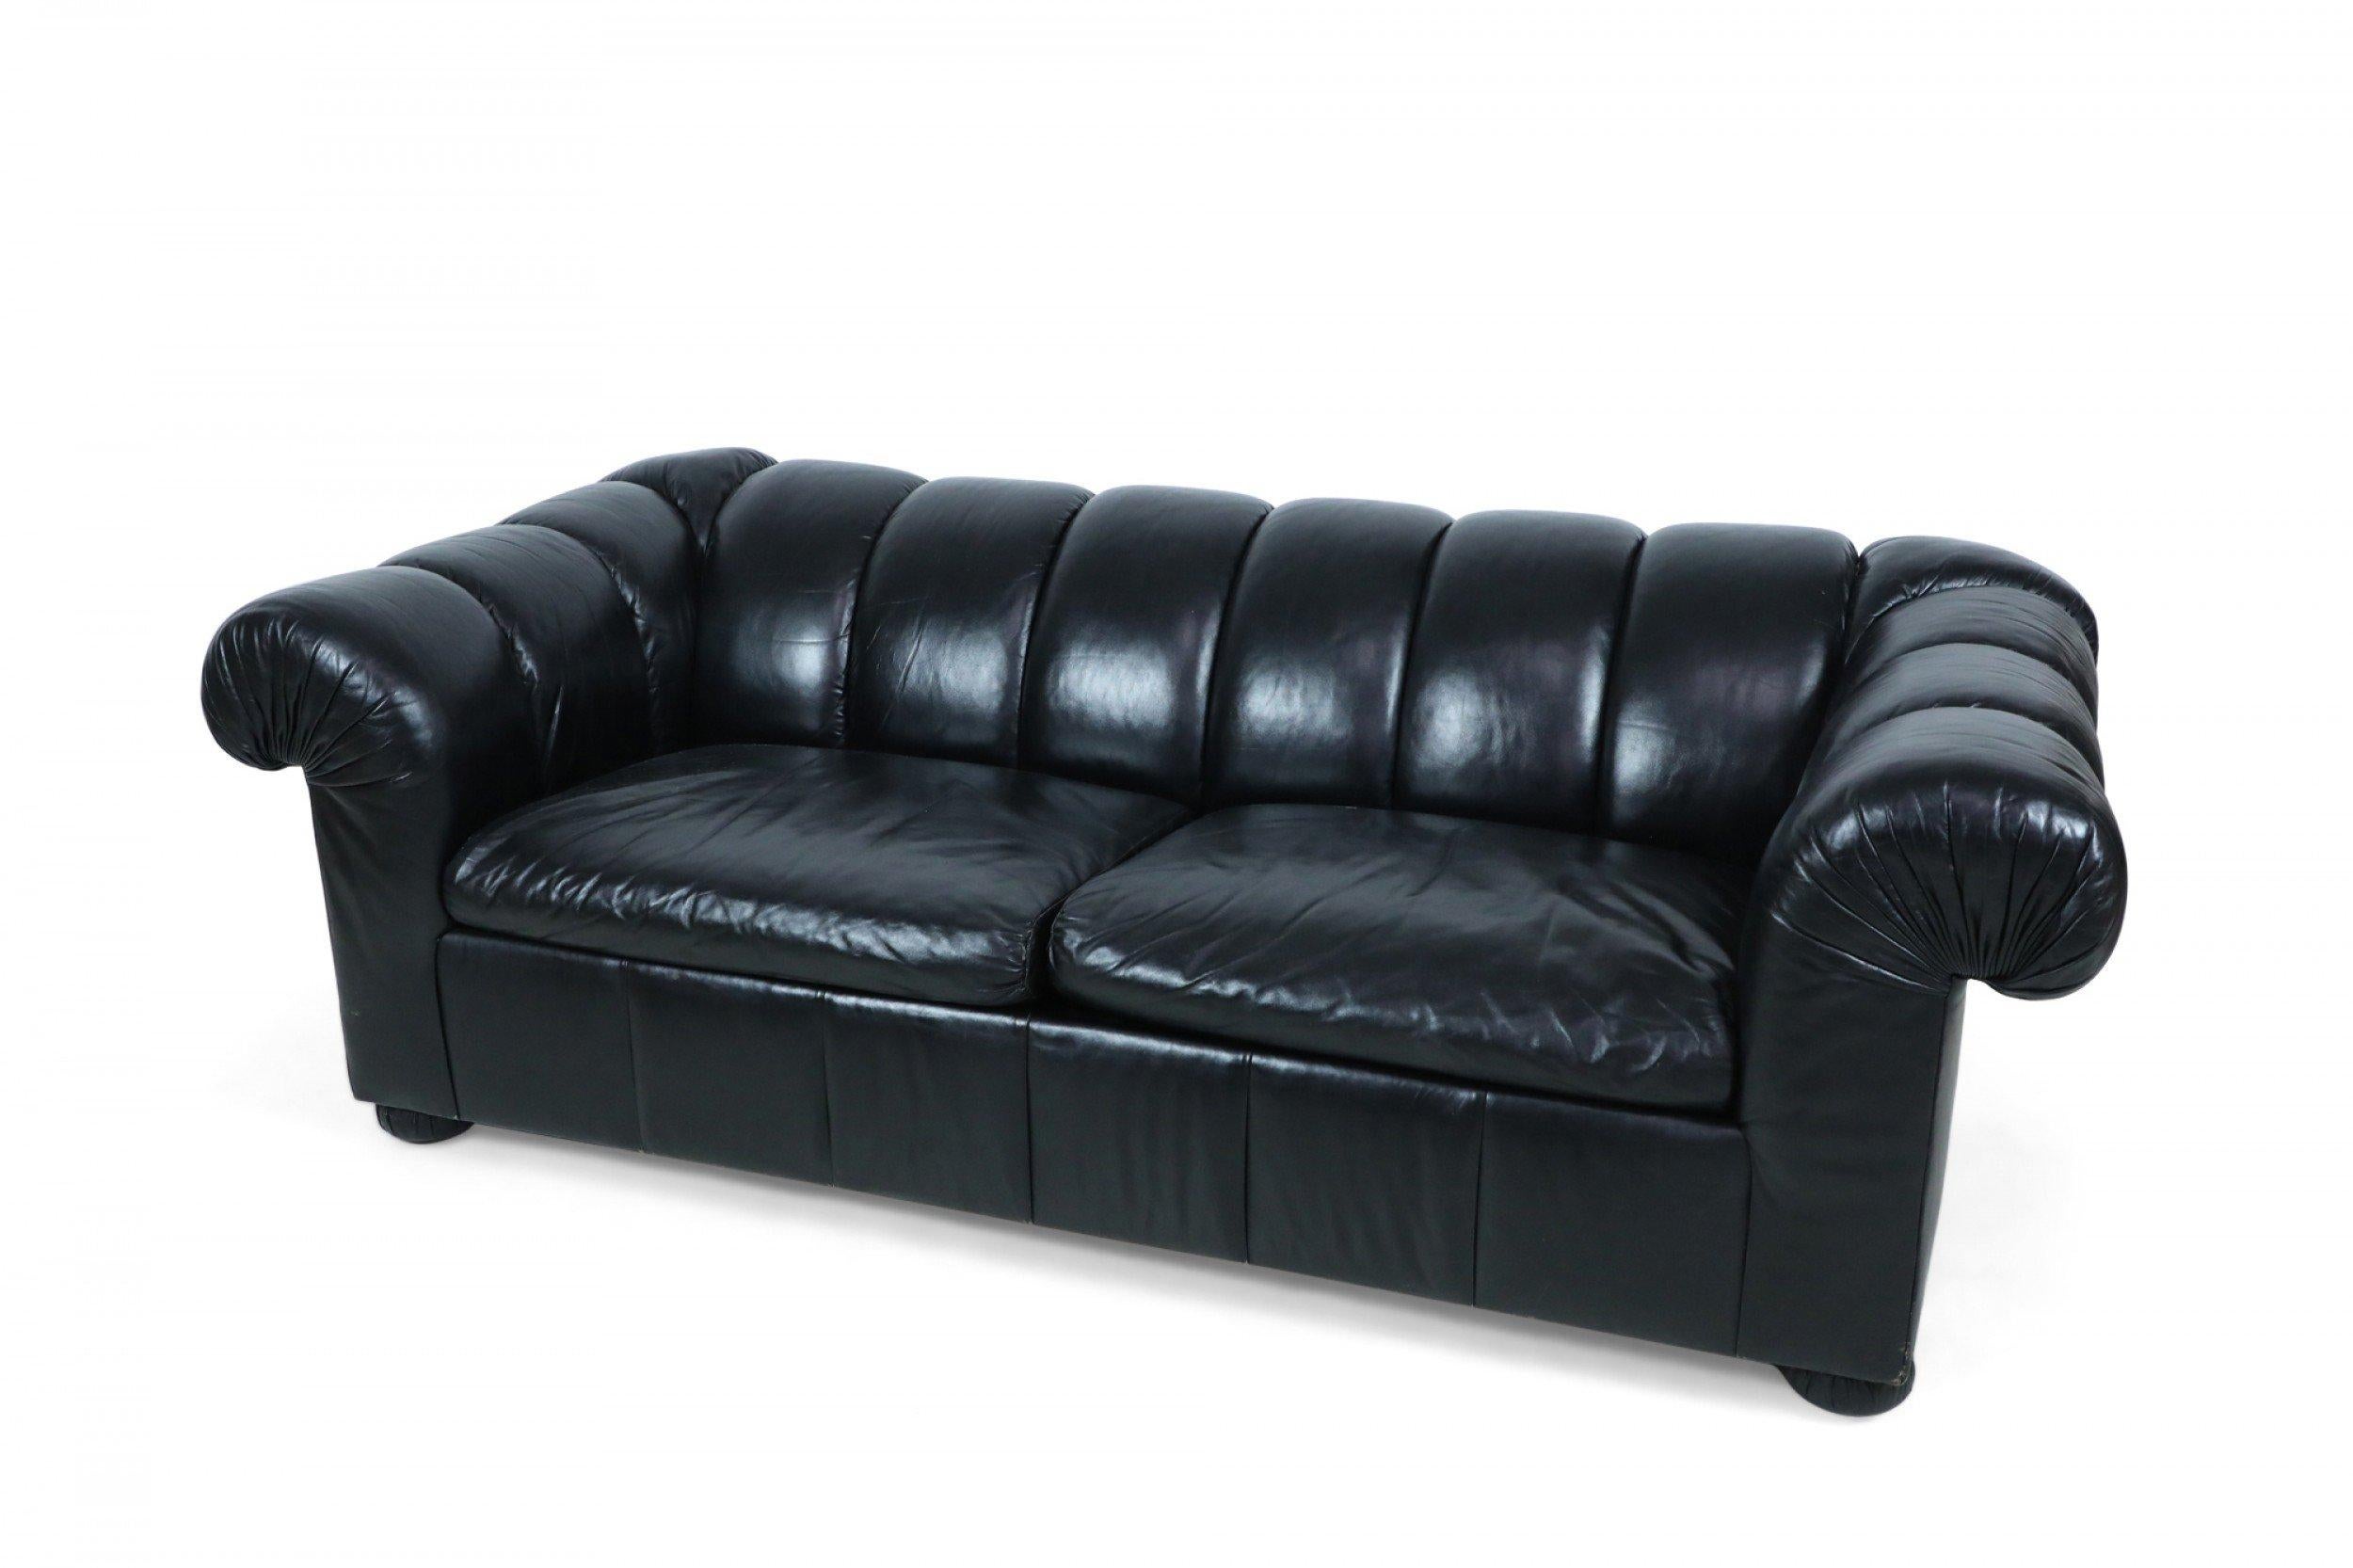 English style contemporary Chesterfield tufted black leather sofa with pull out folding bed beneath two channeled seat cushions.
 